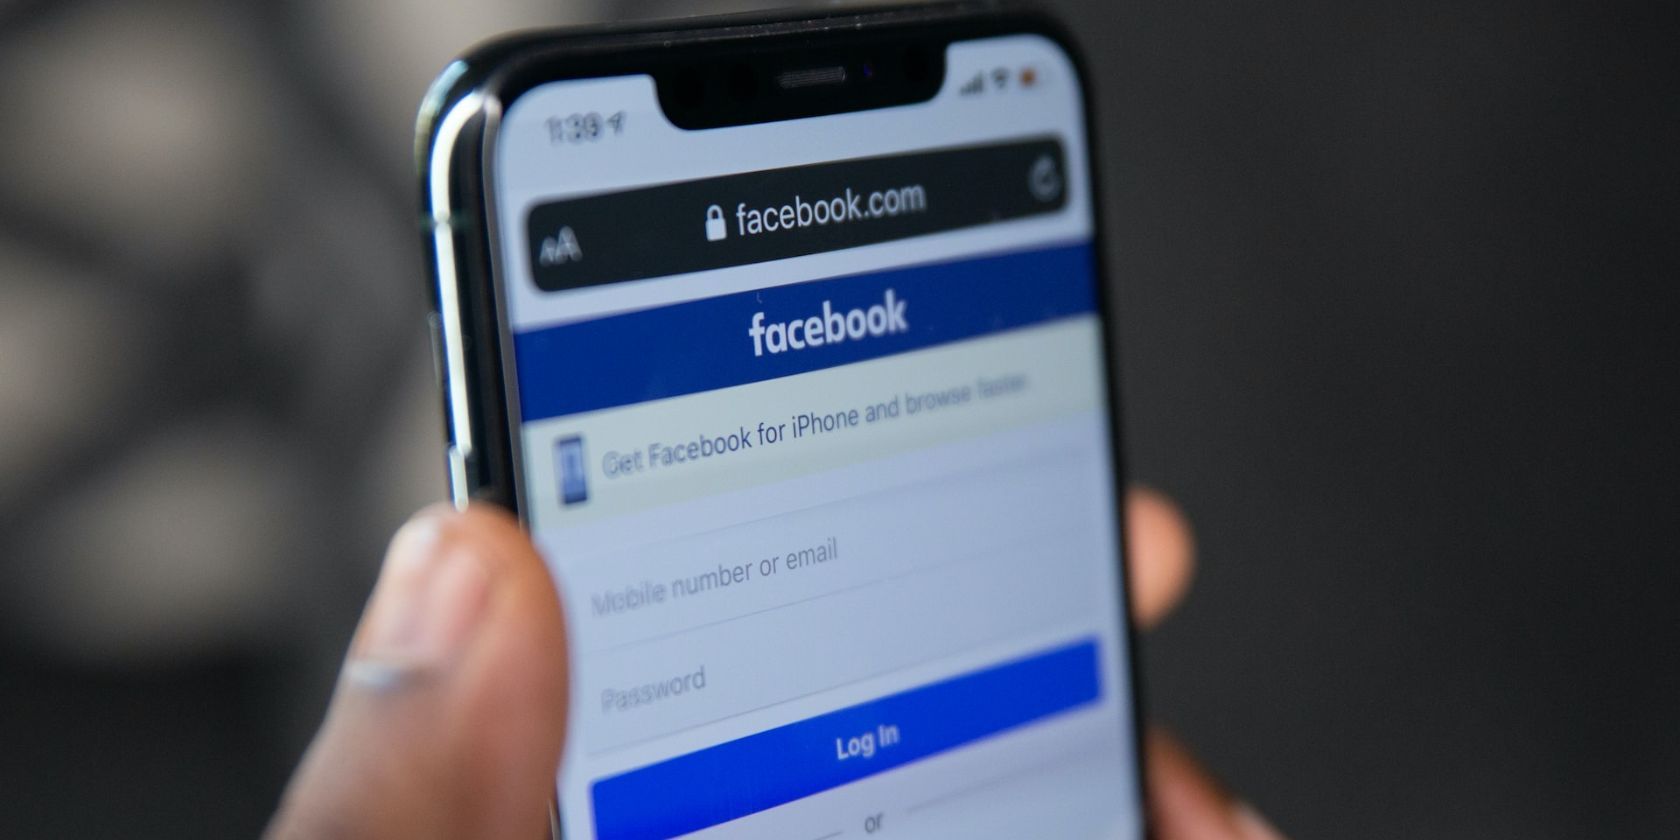 Facebook login page on a smartphone